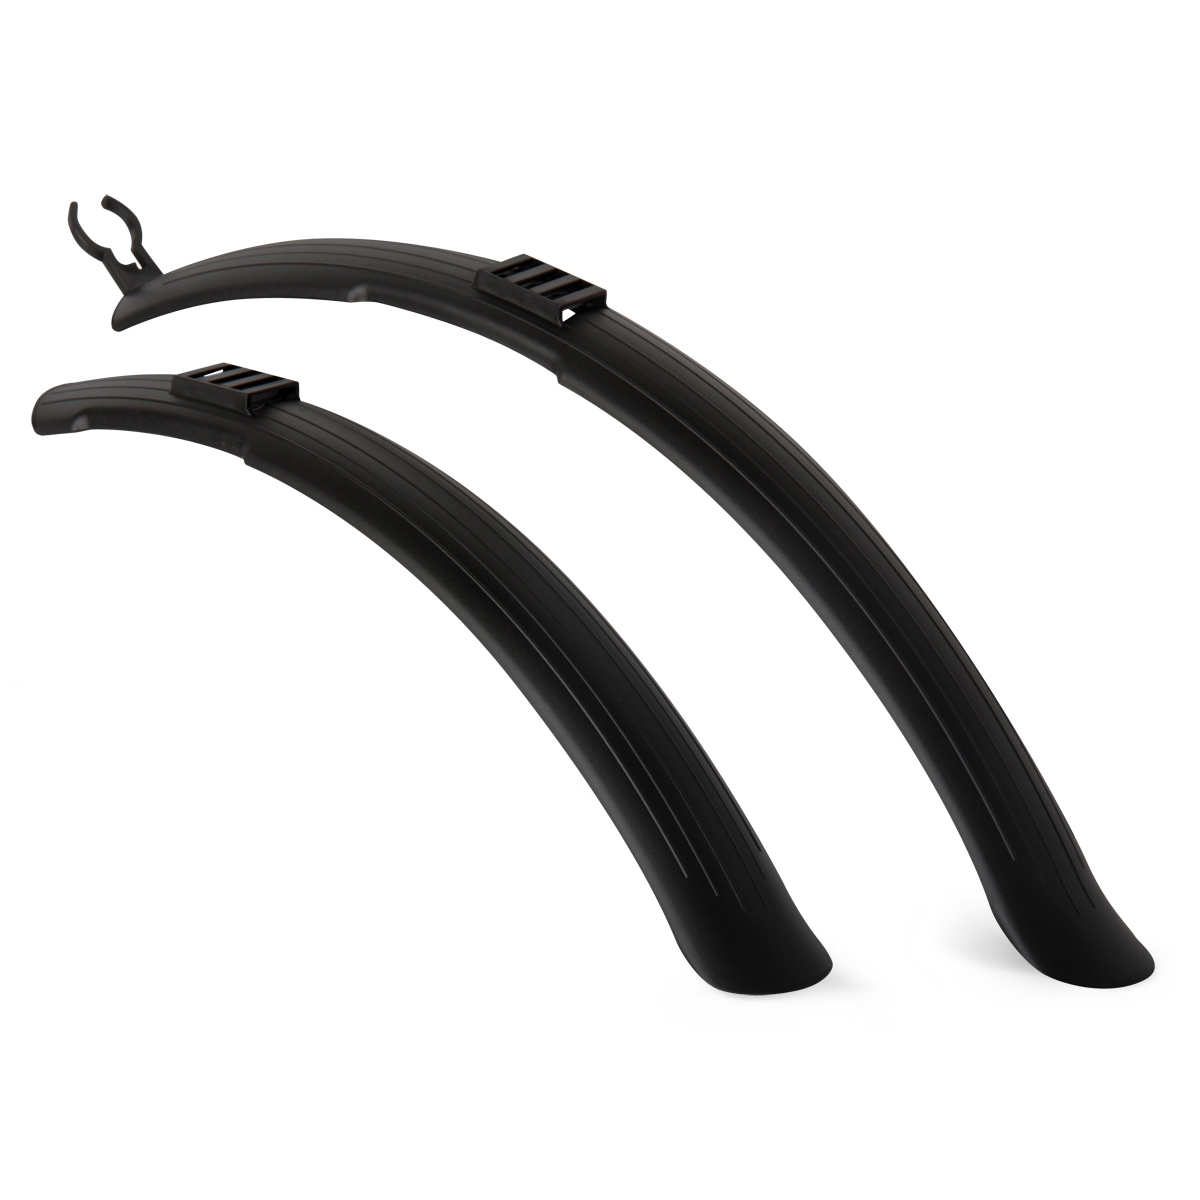 AF24-1A - Front and rear mudguard for 2426 bicycles